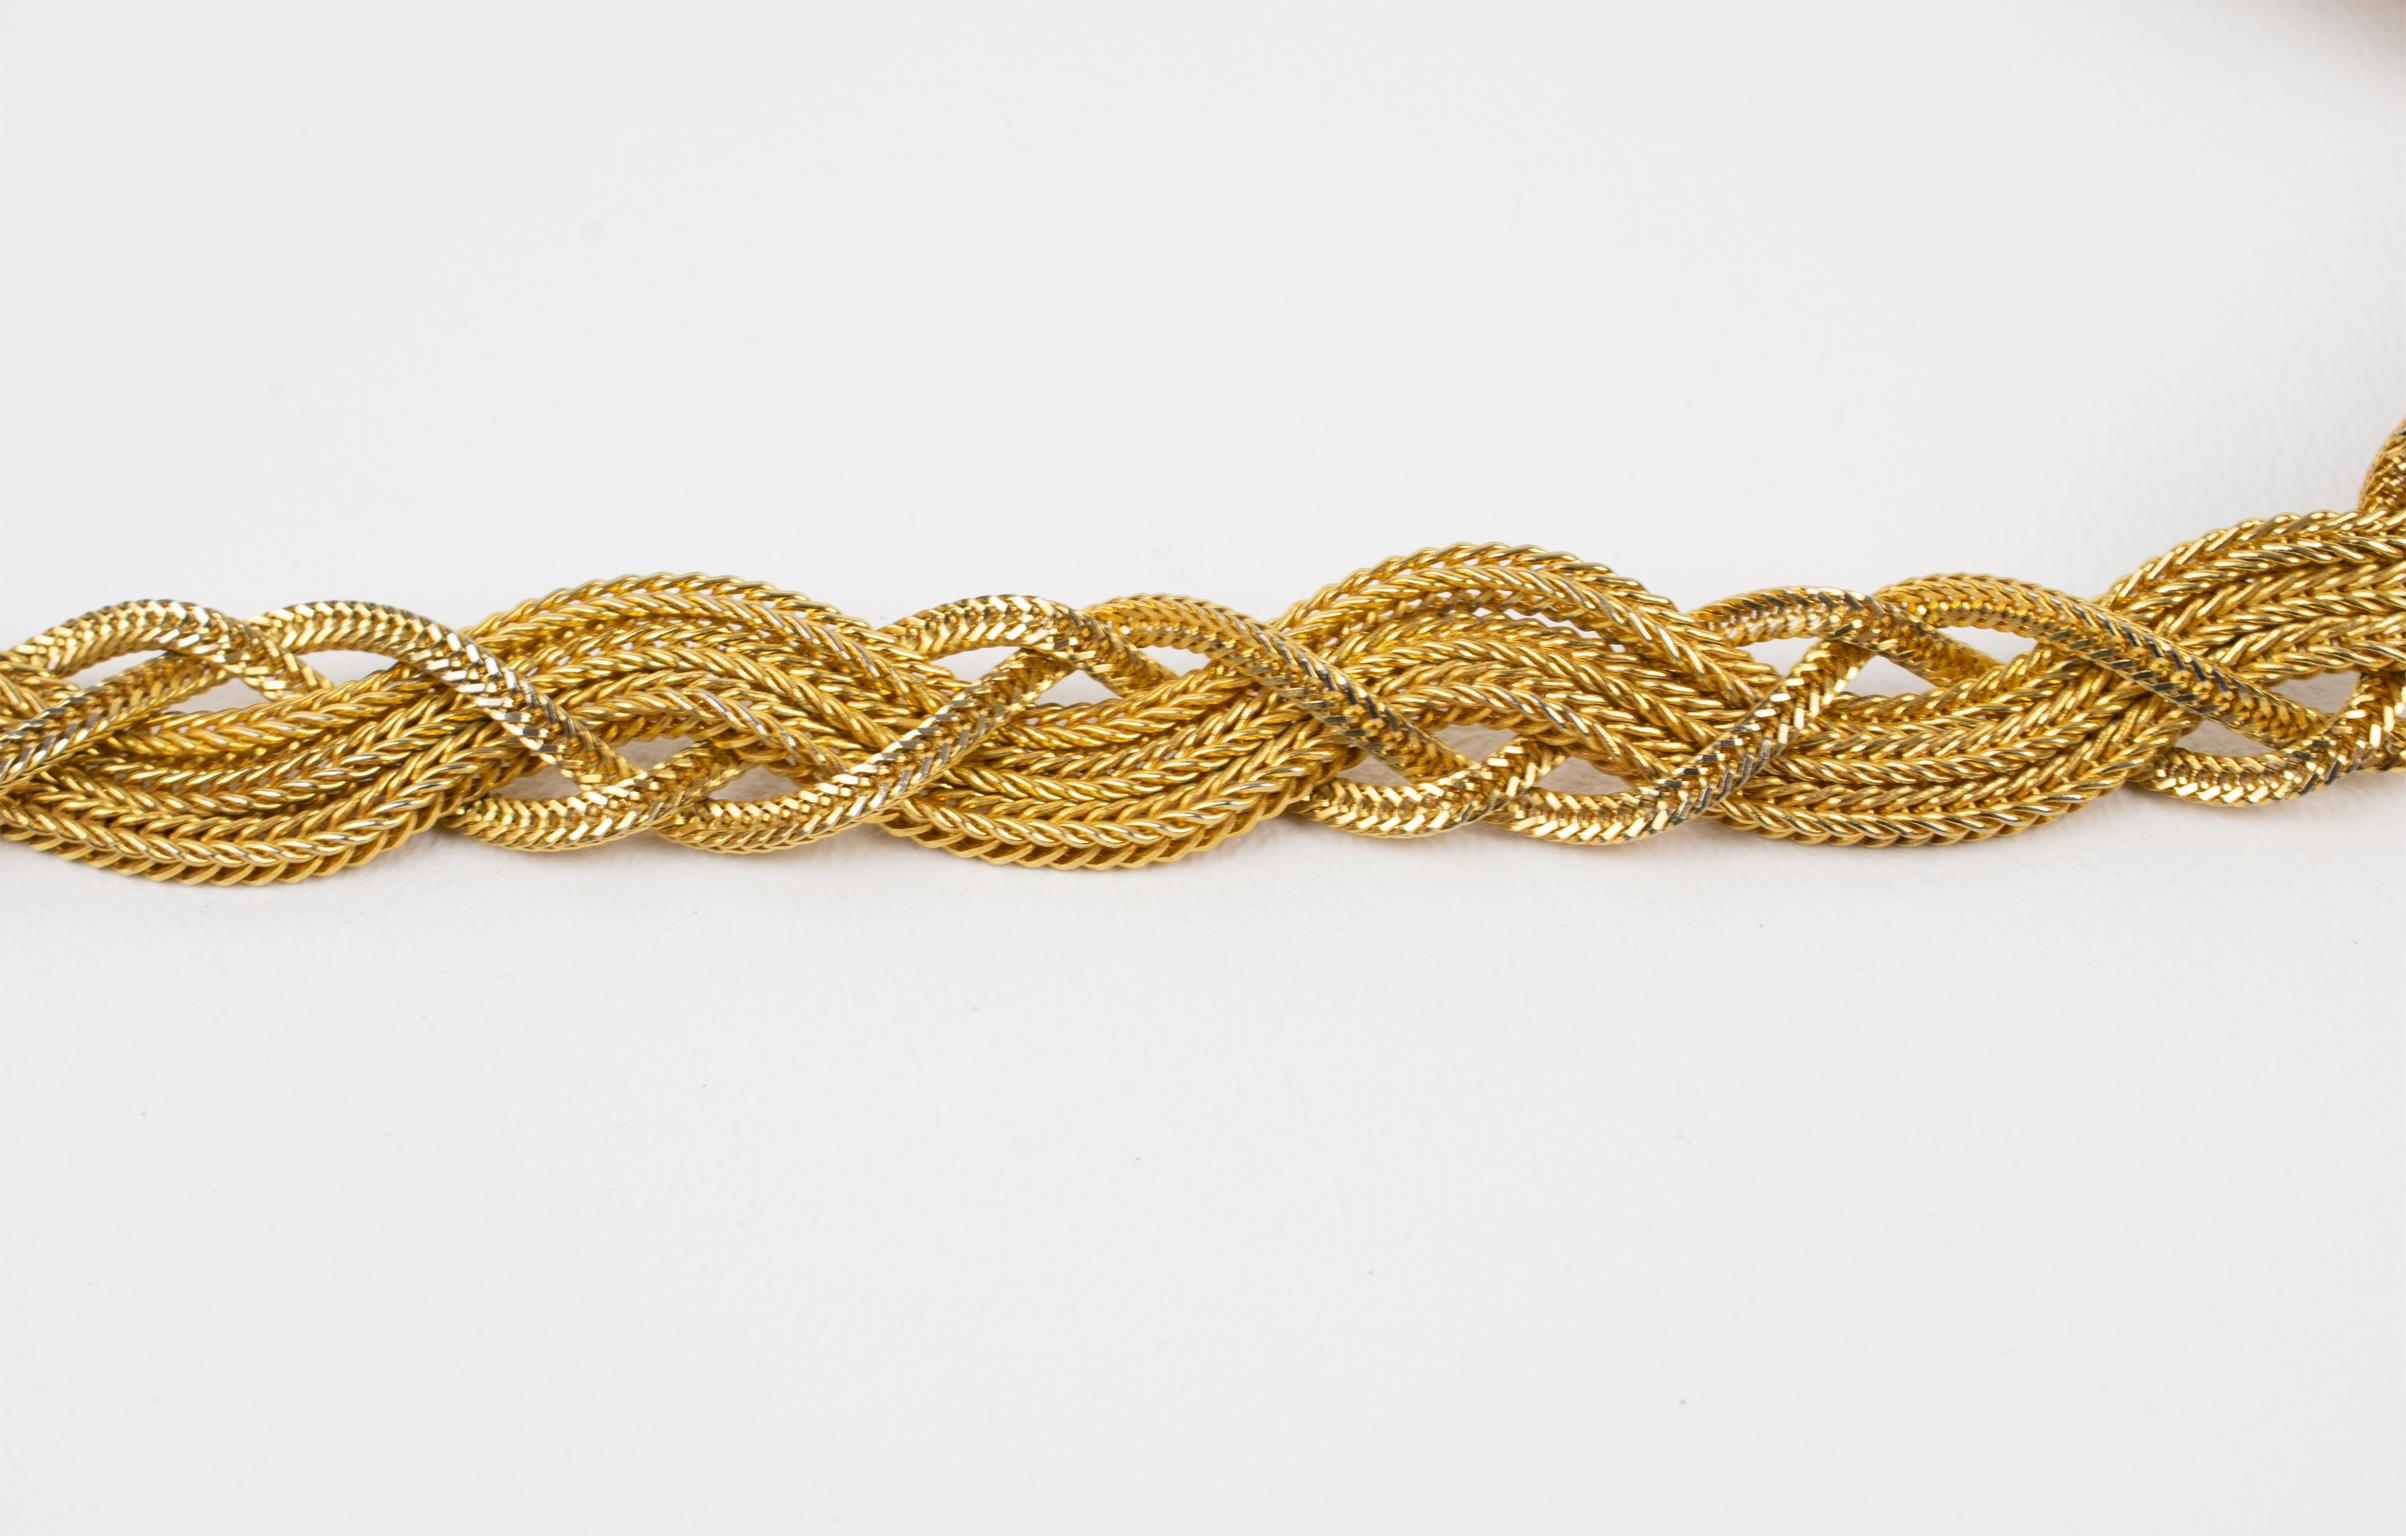 Christian Dior by Grosse 1958 Gilded Metal Braided Choker Necklace For Sale 3